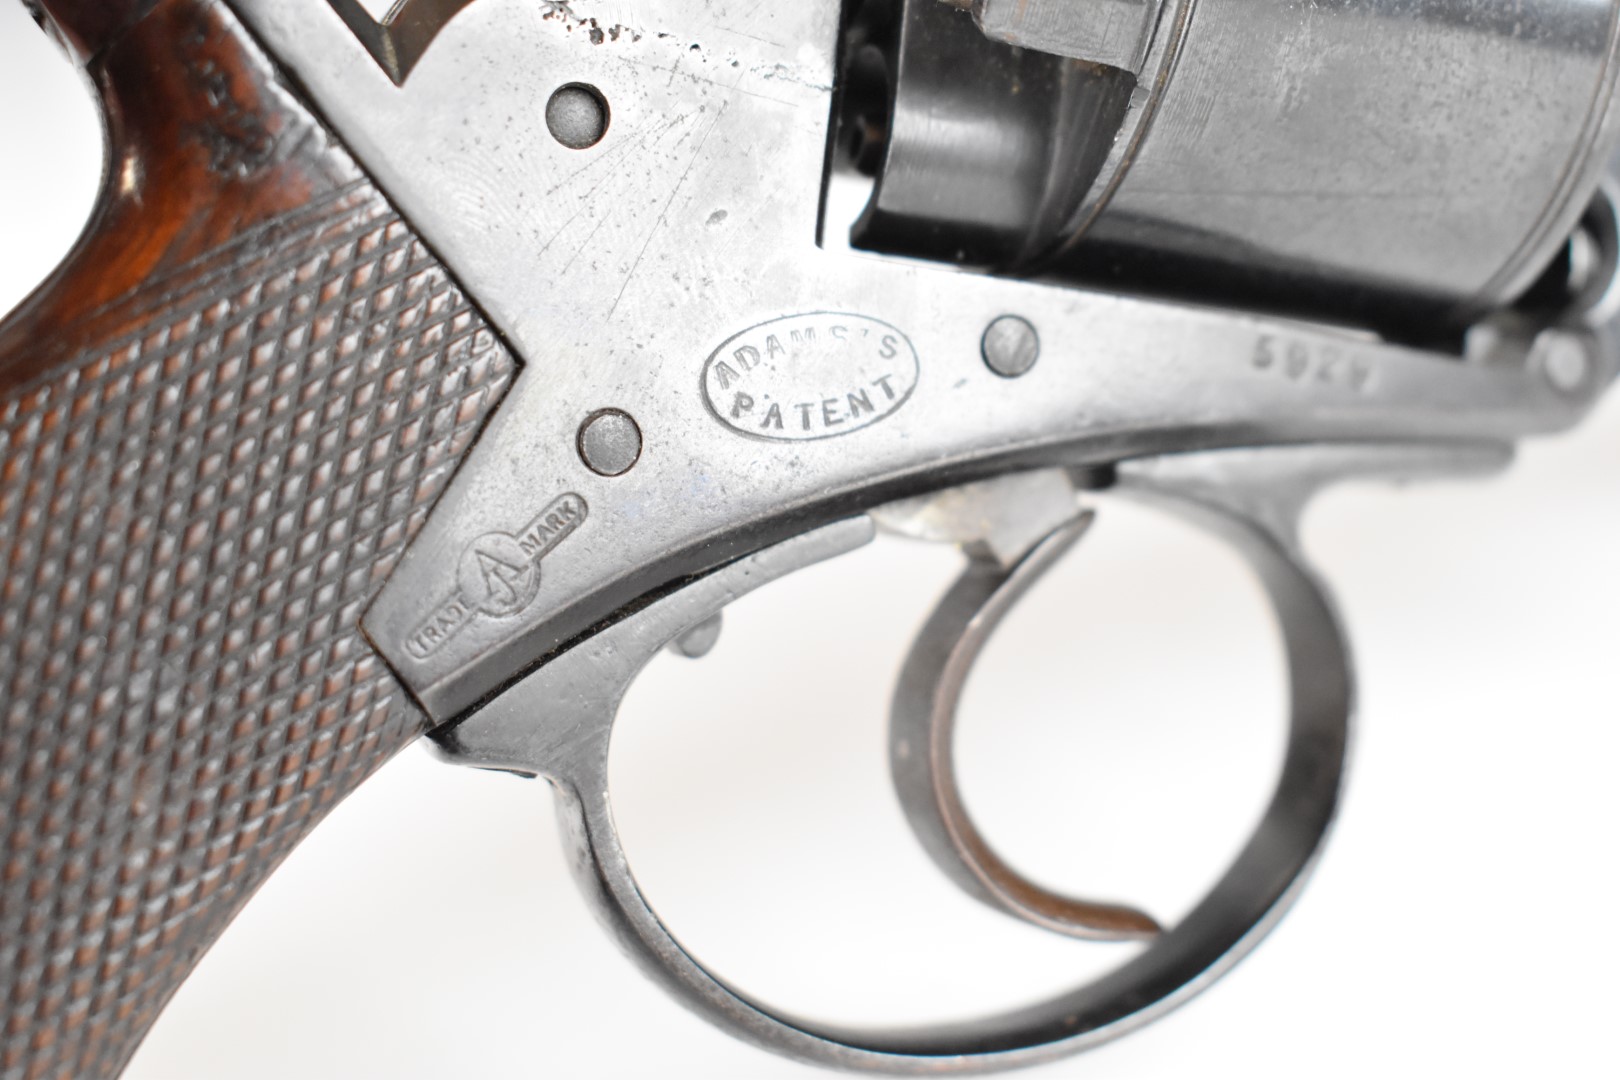 Adam's Patent 50 bore six-shot double-action revolver with chequered grip, line engraved cylinder, - Image 30 of 30